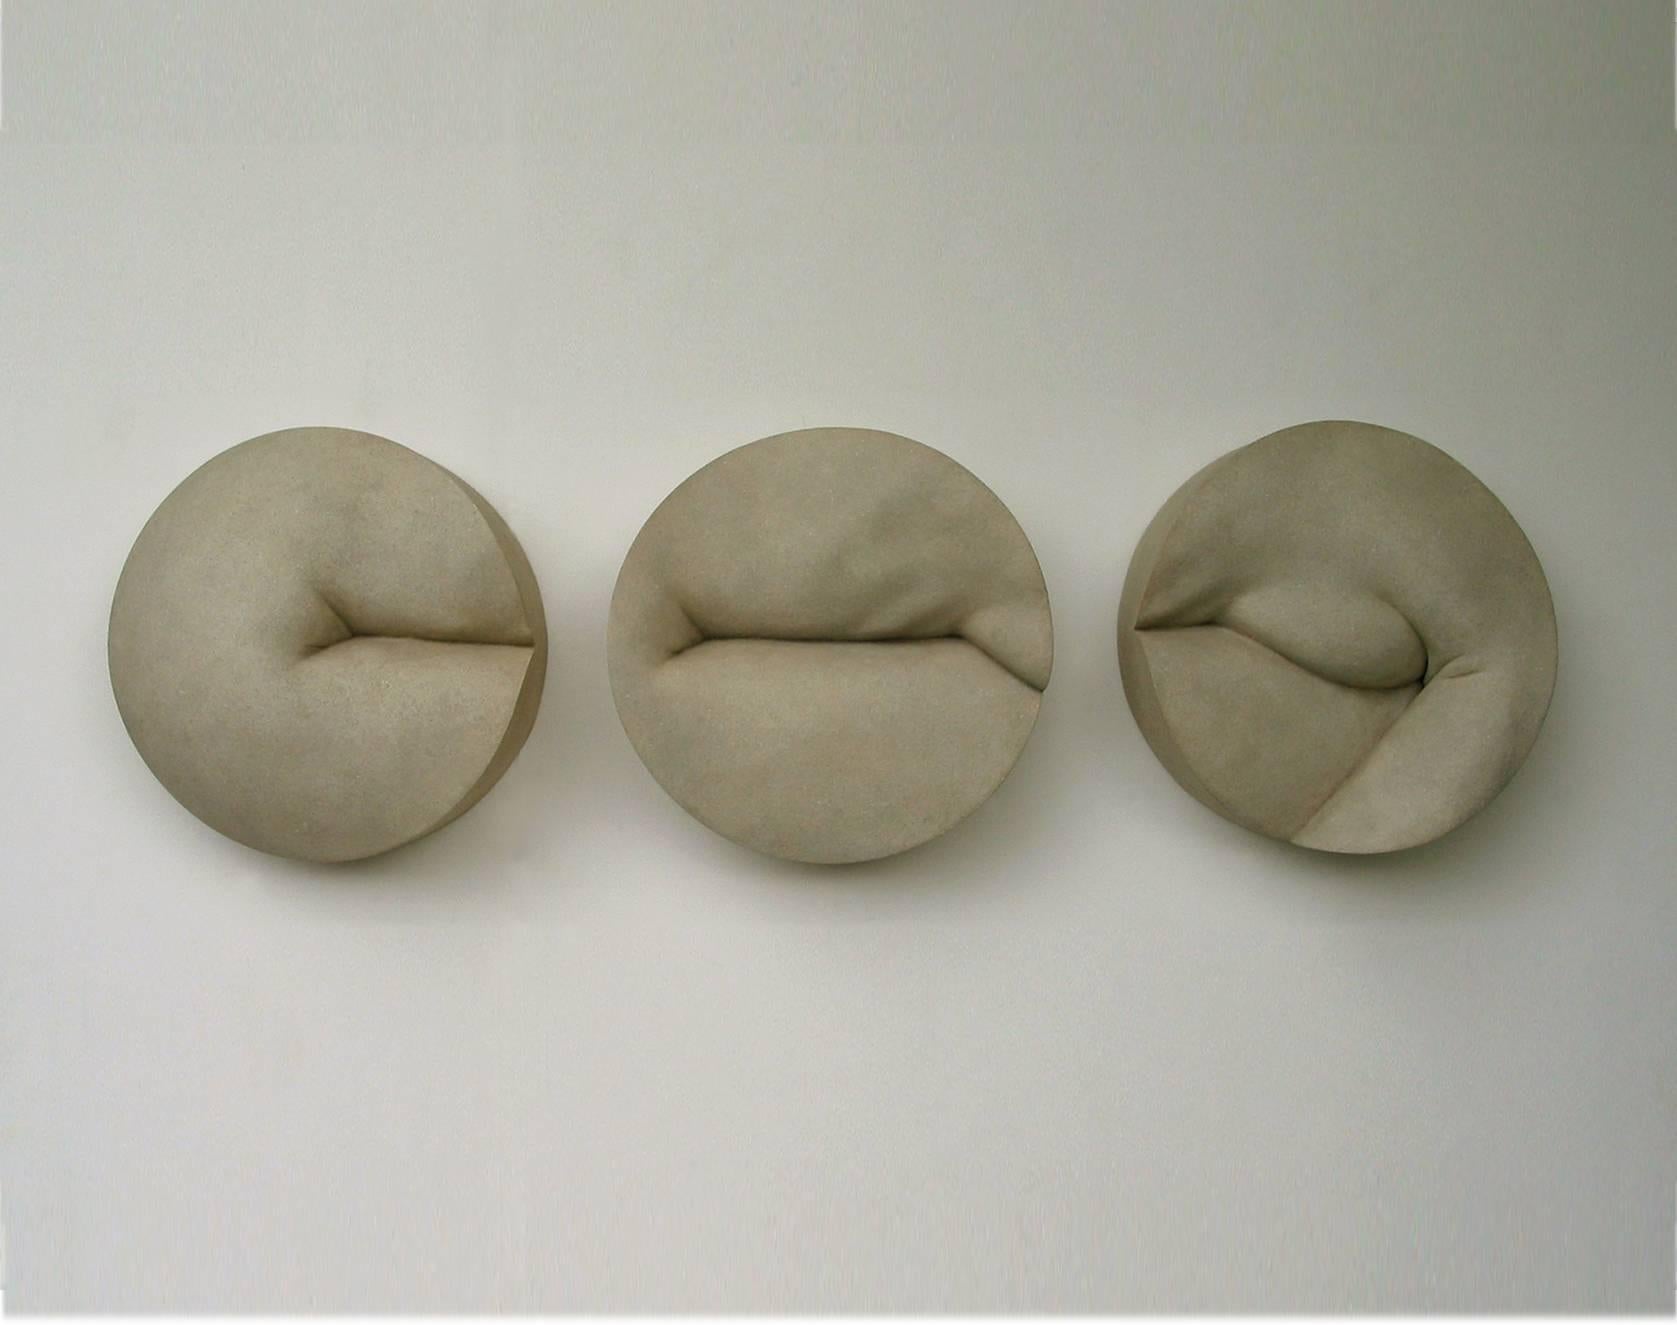 This work by Tanya Ragir is a triptych composed of three figurative elements that can be installed in a variety of configurations. It is fabricated in cast resin, wood, acrylic paint, and raw pigments in a limited edition of 9.

Dimensions: 
16